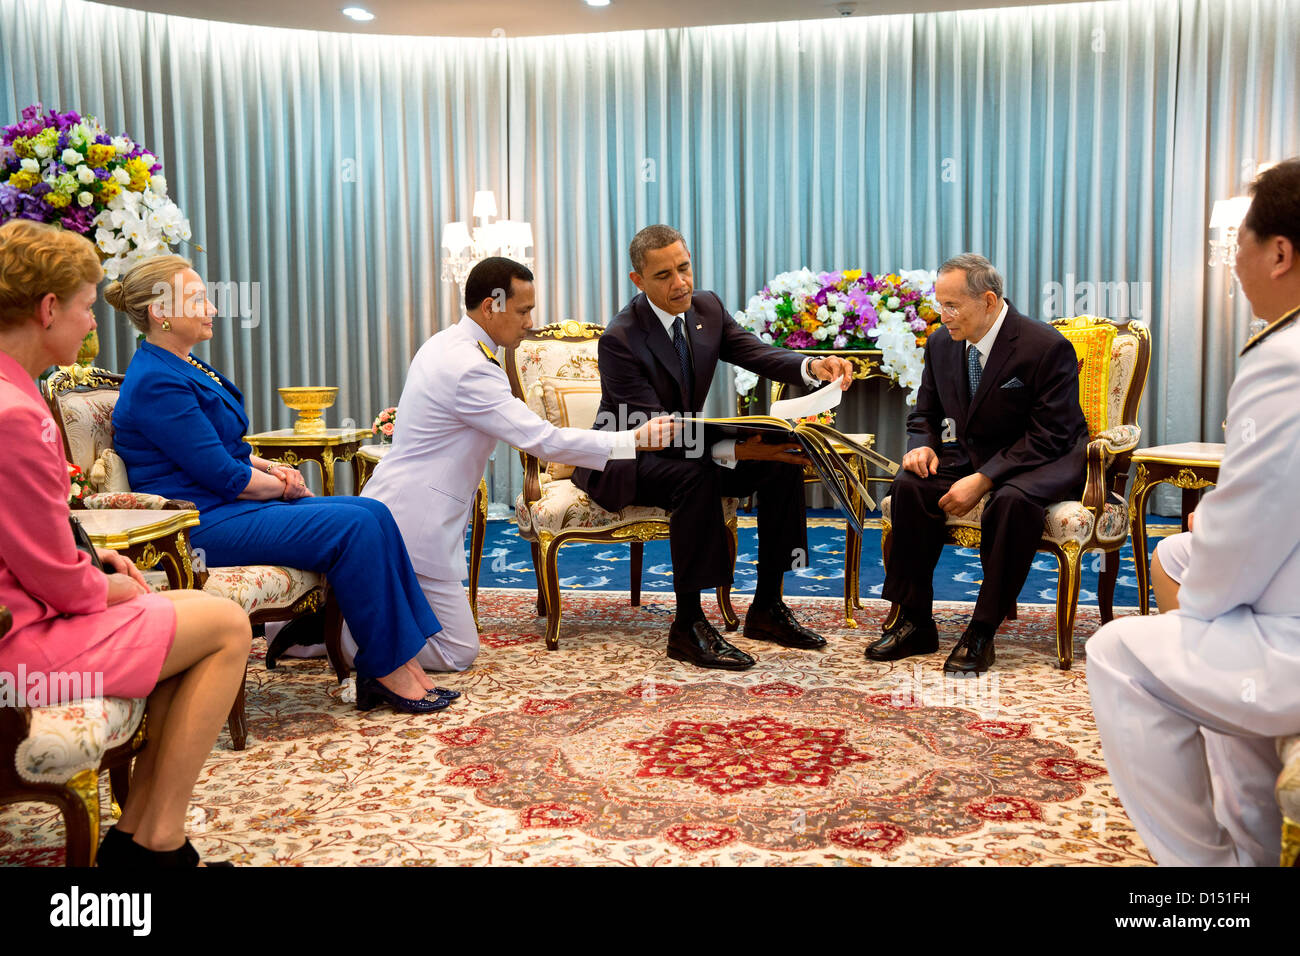 US President Barack Obama presents a gift to King Bhumibol Adulyadej of Thailand during their meeting at Siriraj Hospital in November 18, 2012 in Bangkok, Thailand. President Obama presented a photo album containing photos of the King with US Presidents and First Ladies dating back to President Eisenhower. US Ambassador to Thailand Kristie Kenney with Secretary of State Hillary Rodham Clinton are seated at left. Stock Photo